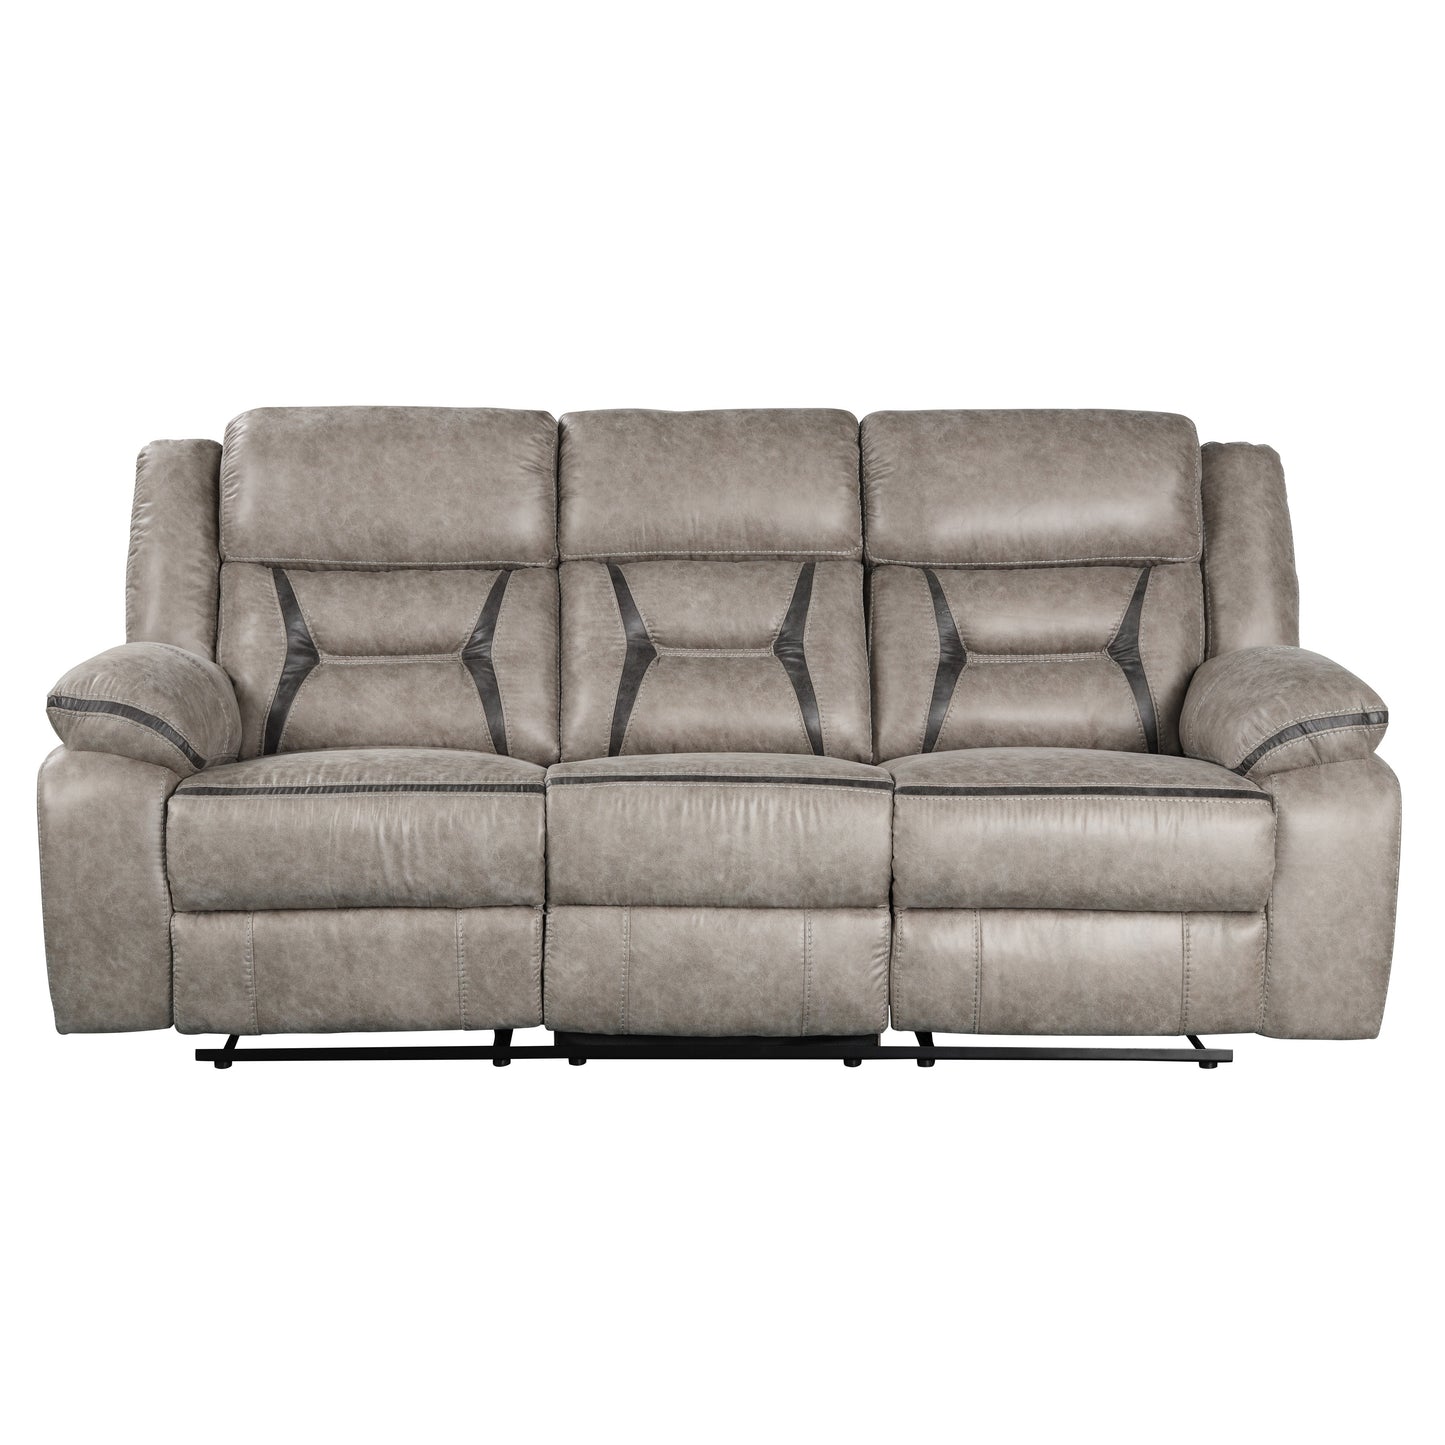 Elkton Manual Motion Reclining Living Room Collection, Taupe